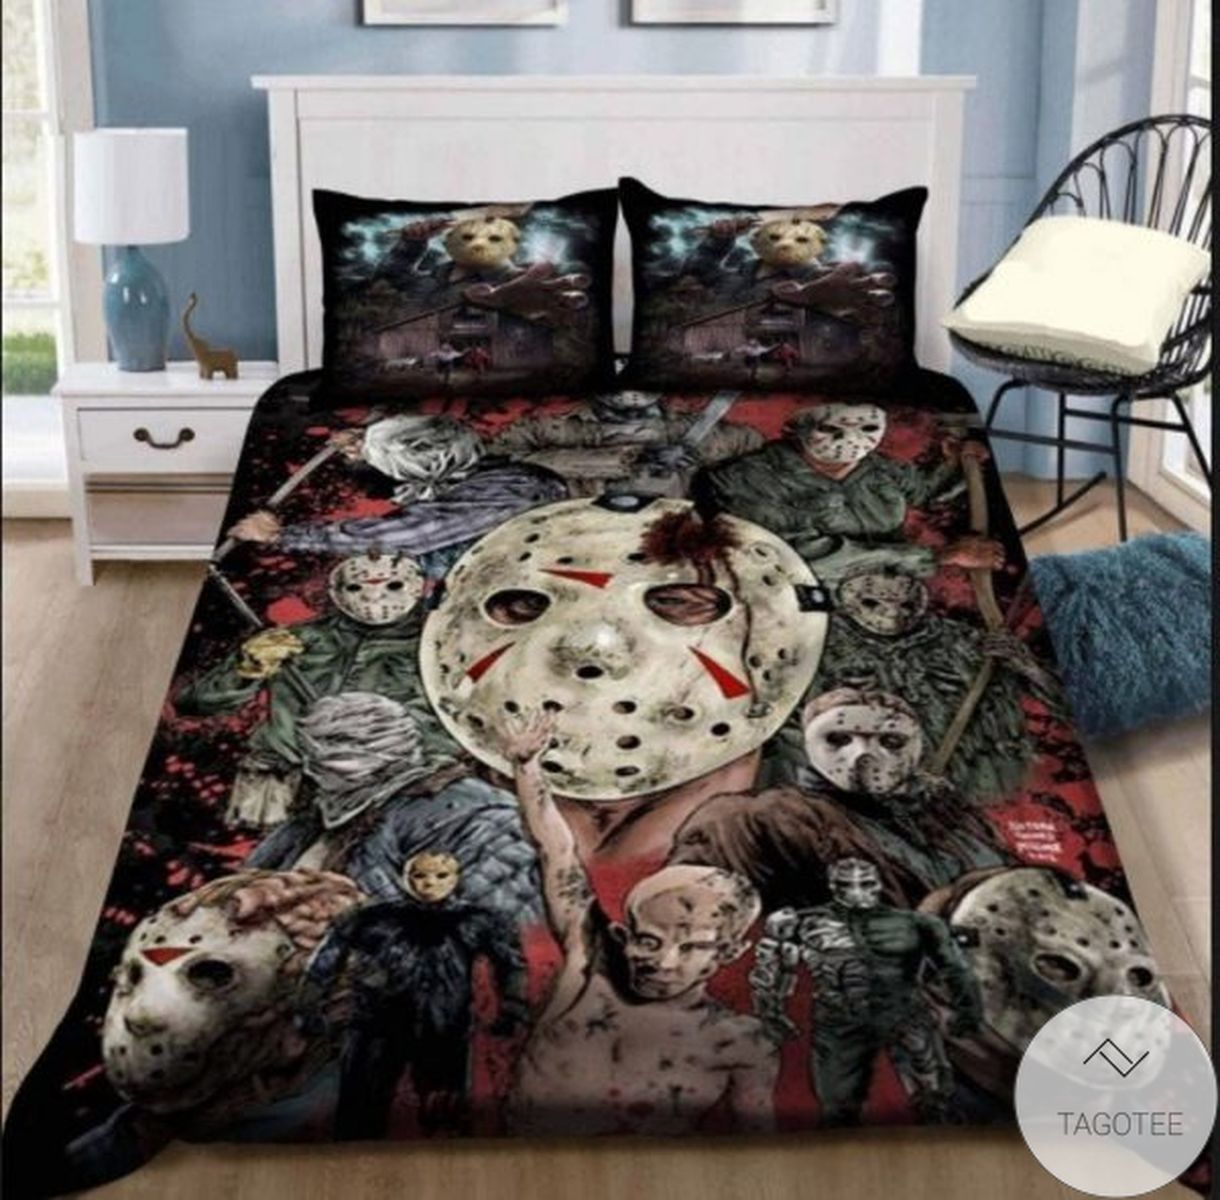 Creepy Friday The 13th Jason Voorhees Faces Bedding Set